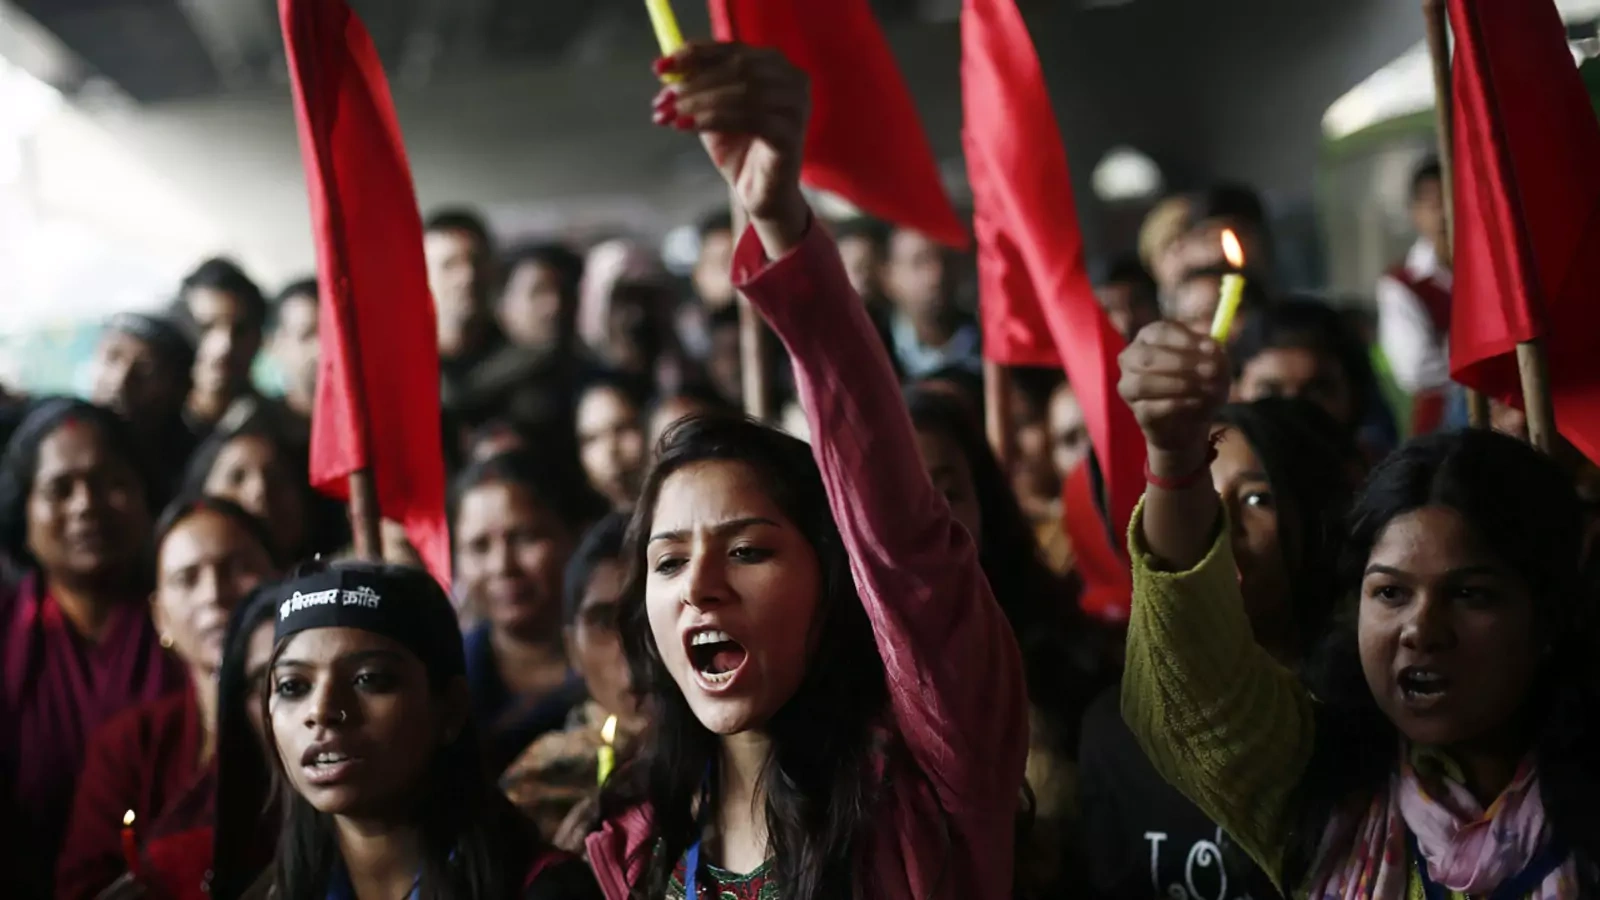 Governance in India: Women's Rights | Council on Foreign Relations